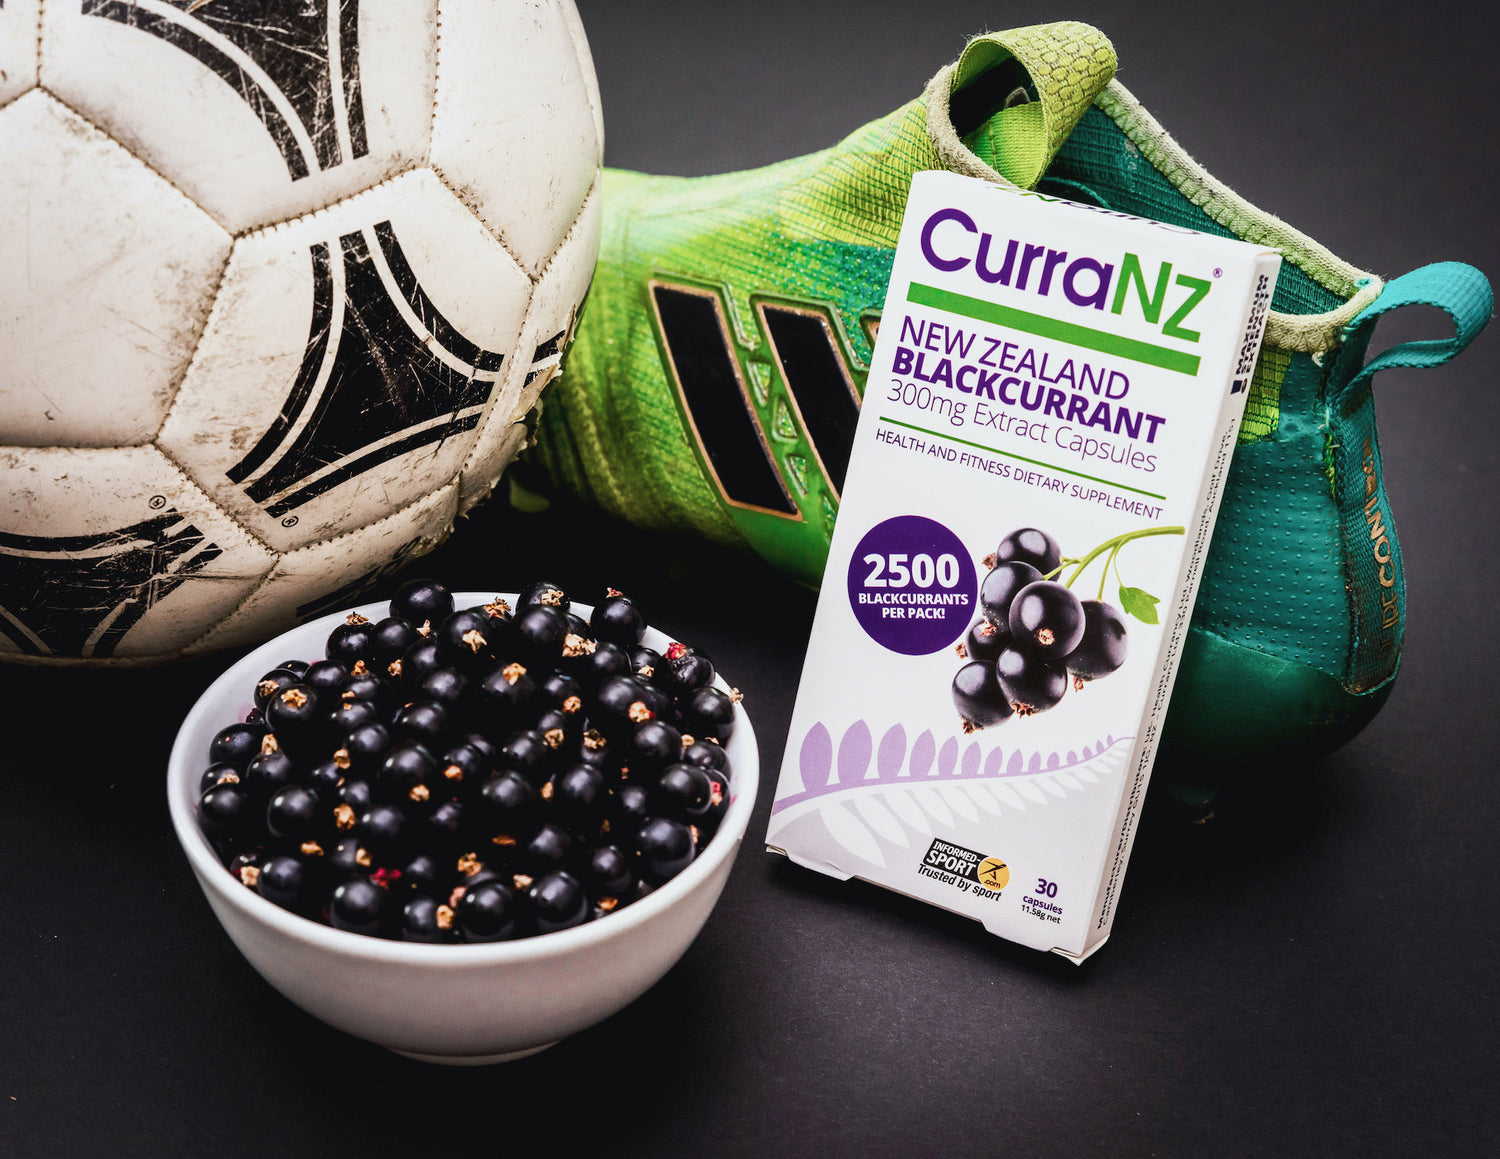 A packet of CurraNZ® sitting beside a bowl of New Zealand blackcurrants and football gear.